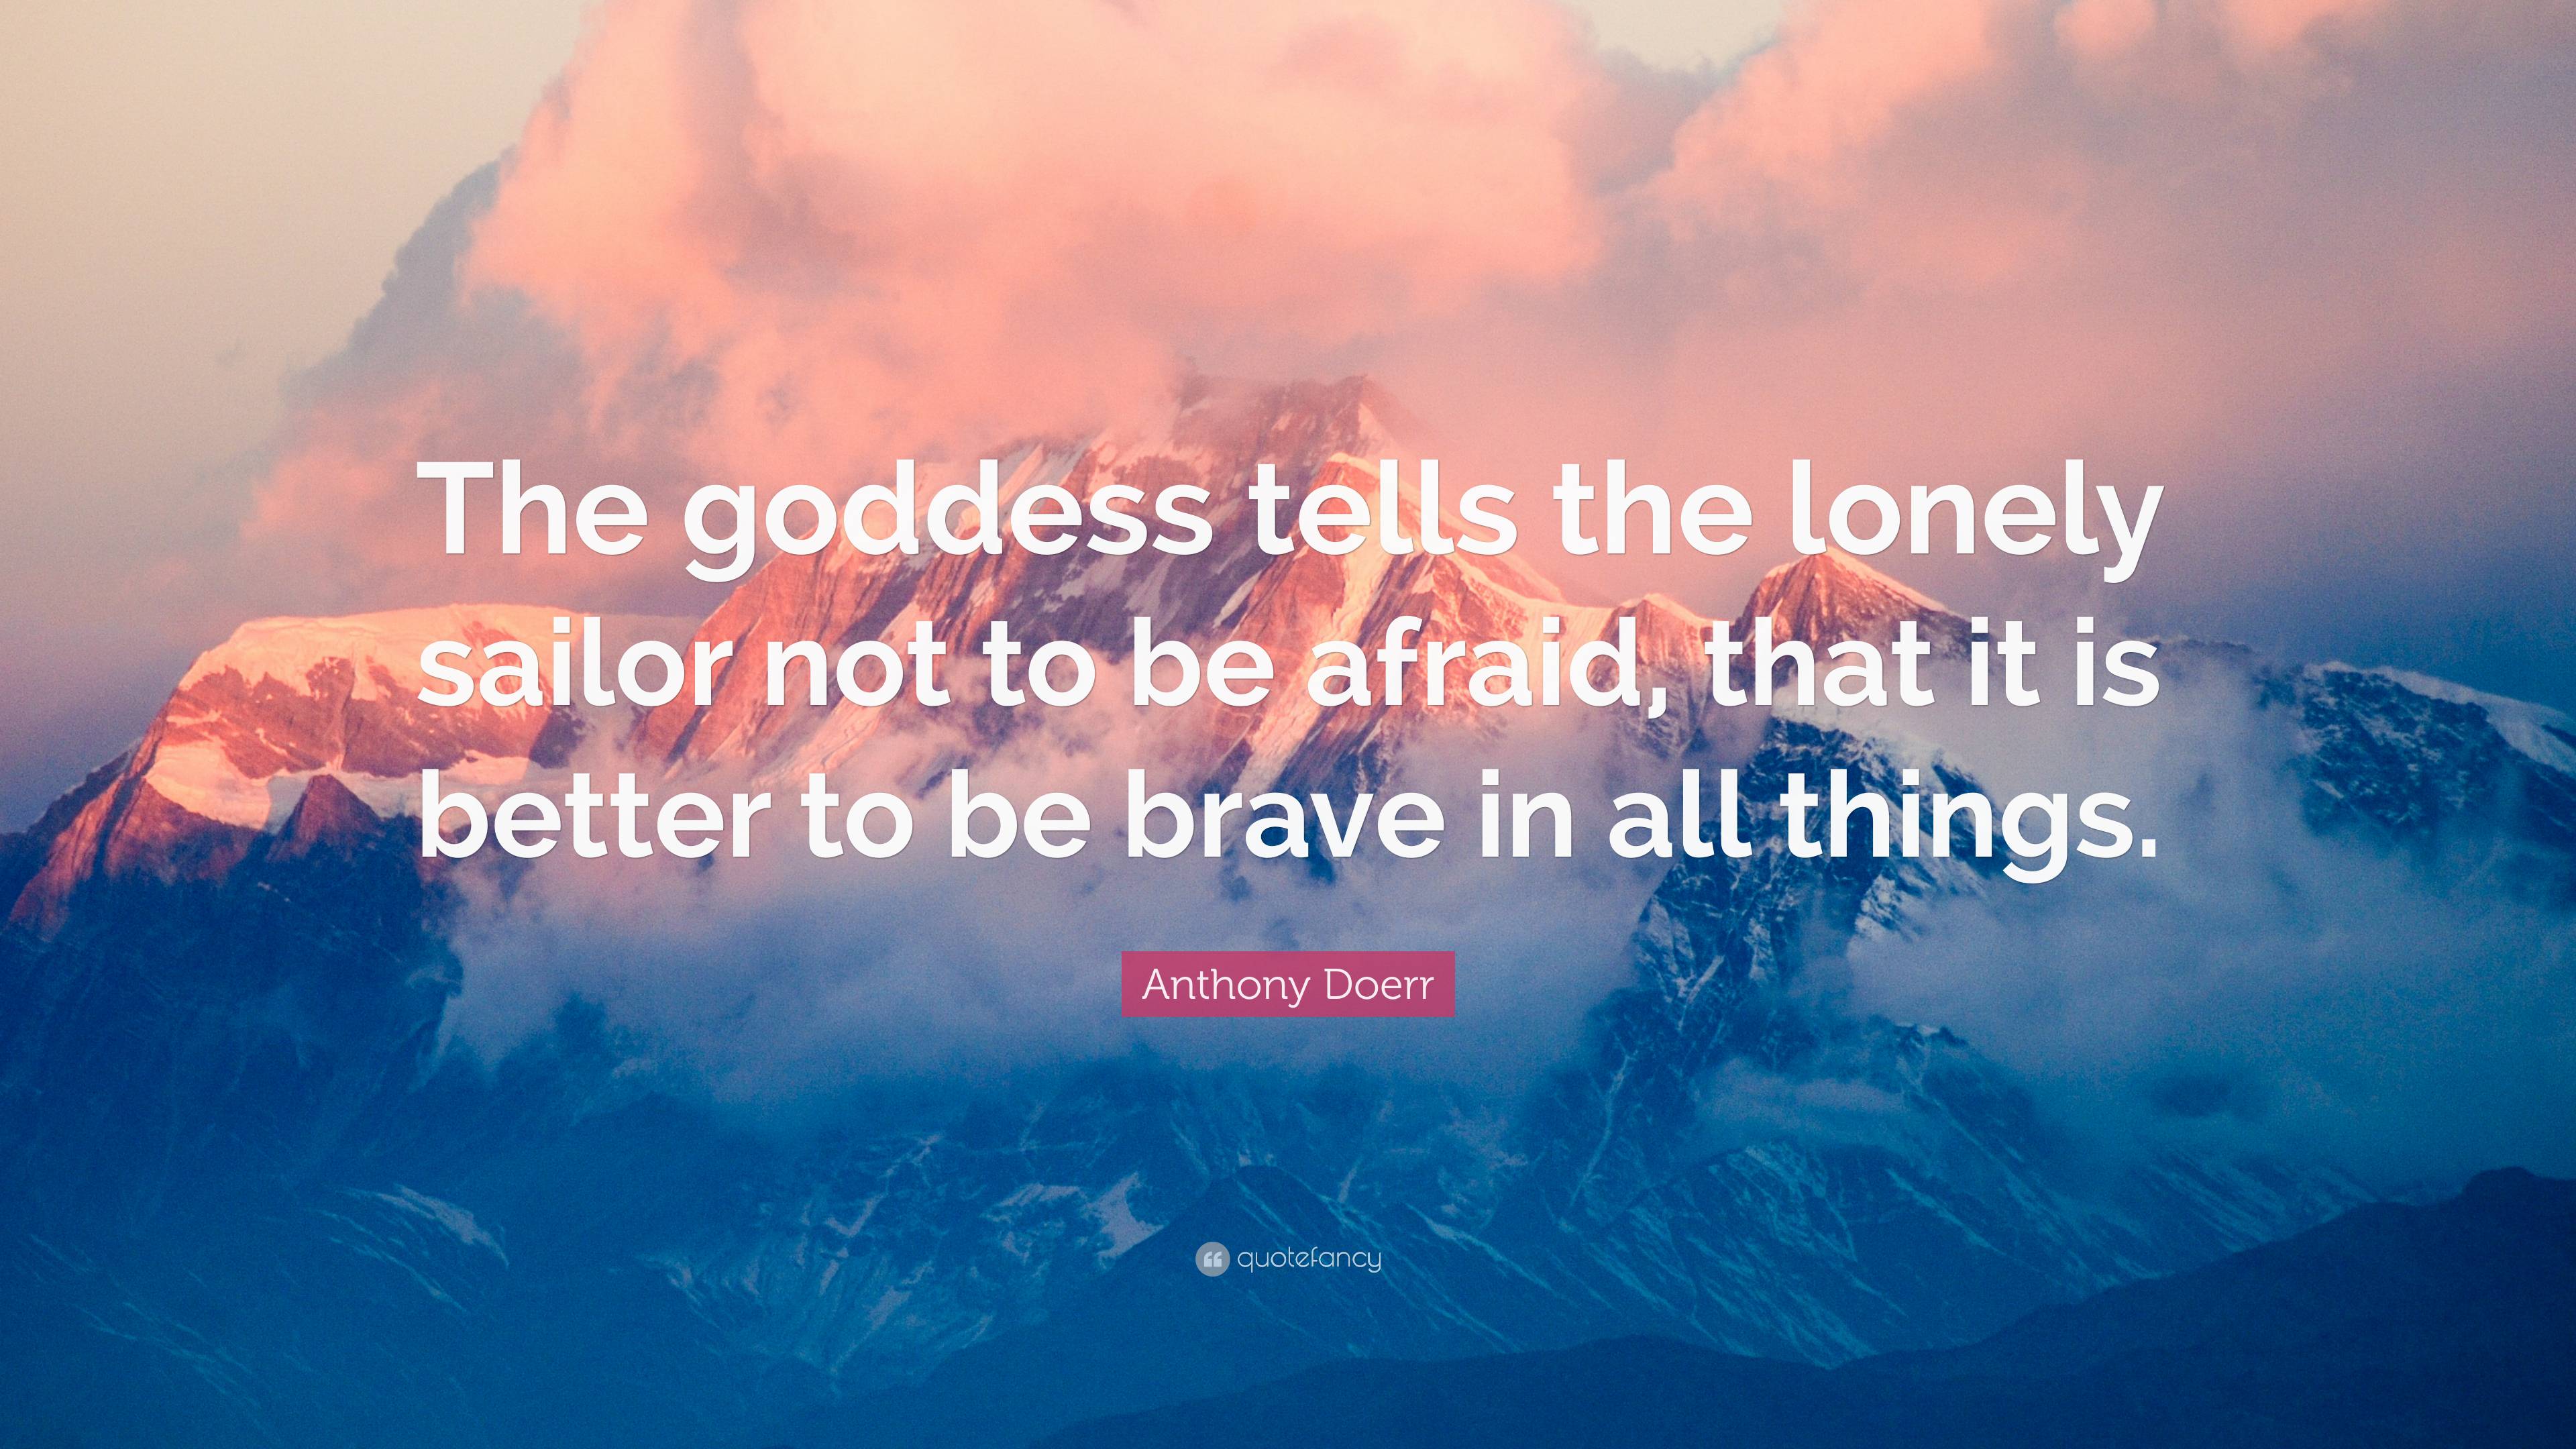 Anthony Doerr Quote: “The goddess tells the lonely sailor not to be ...